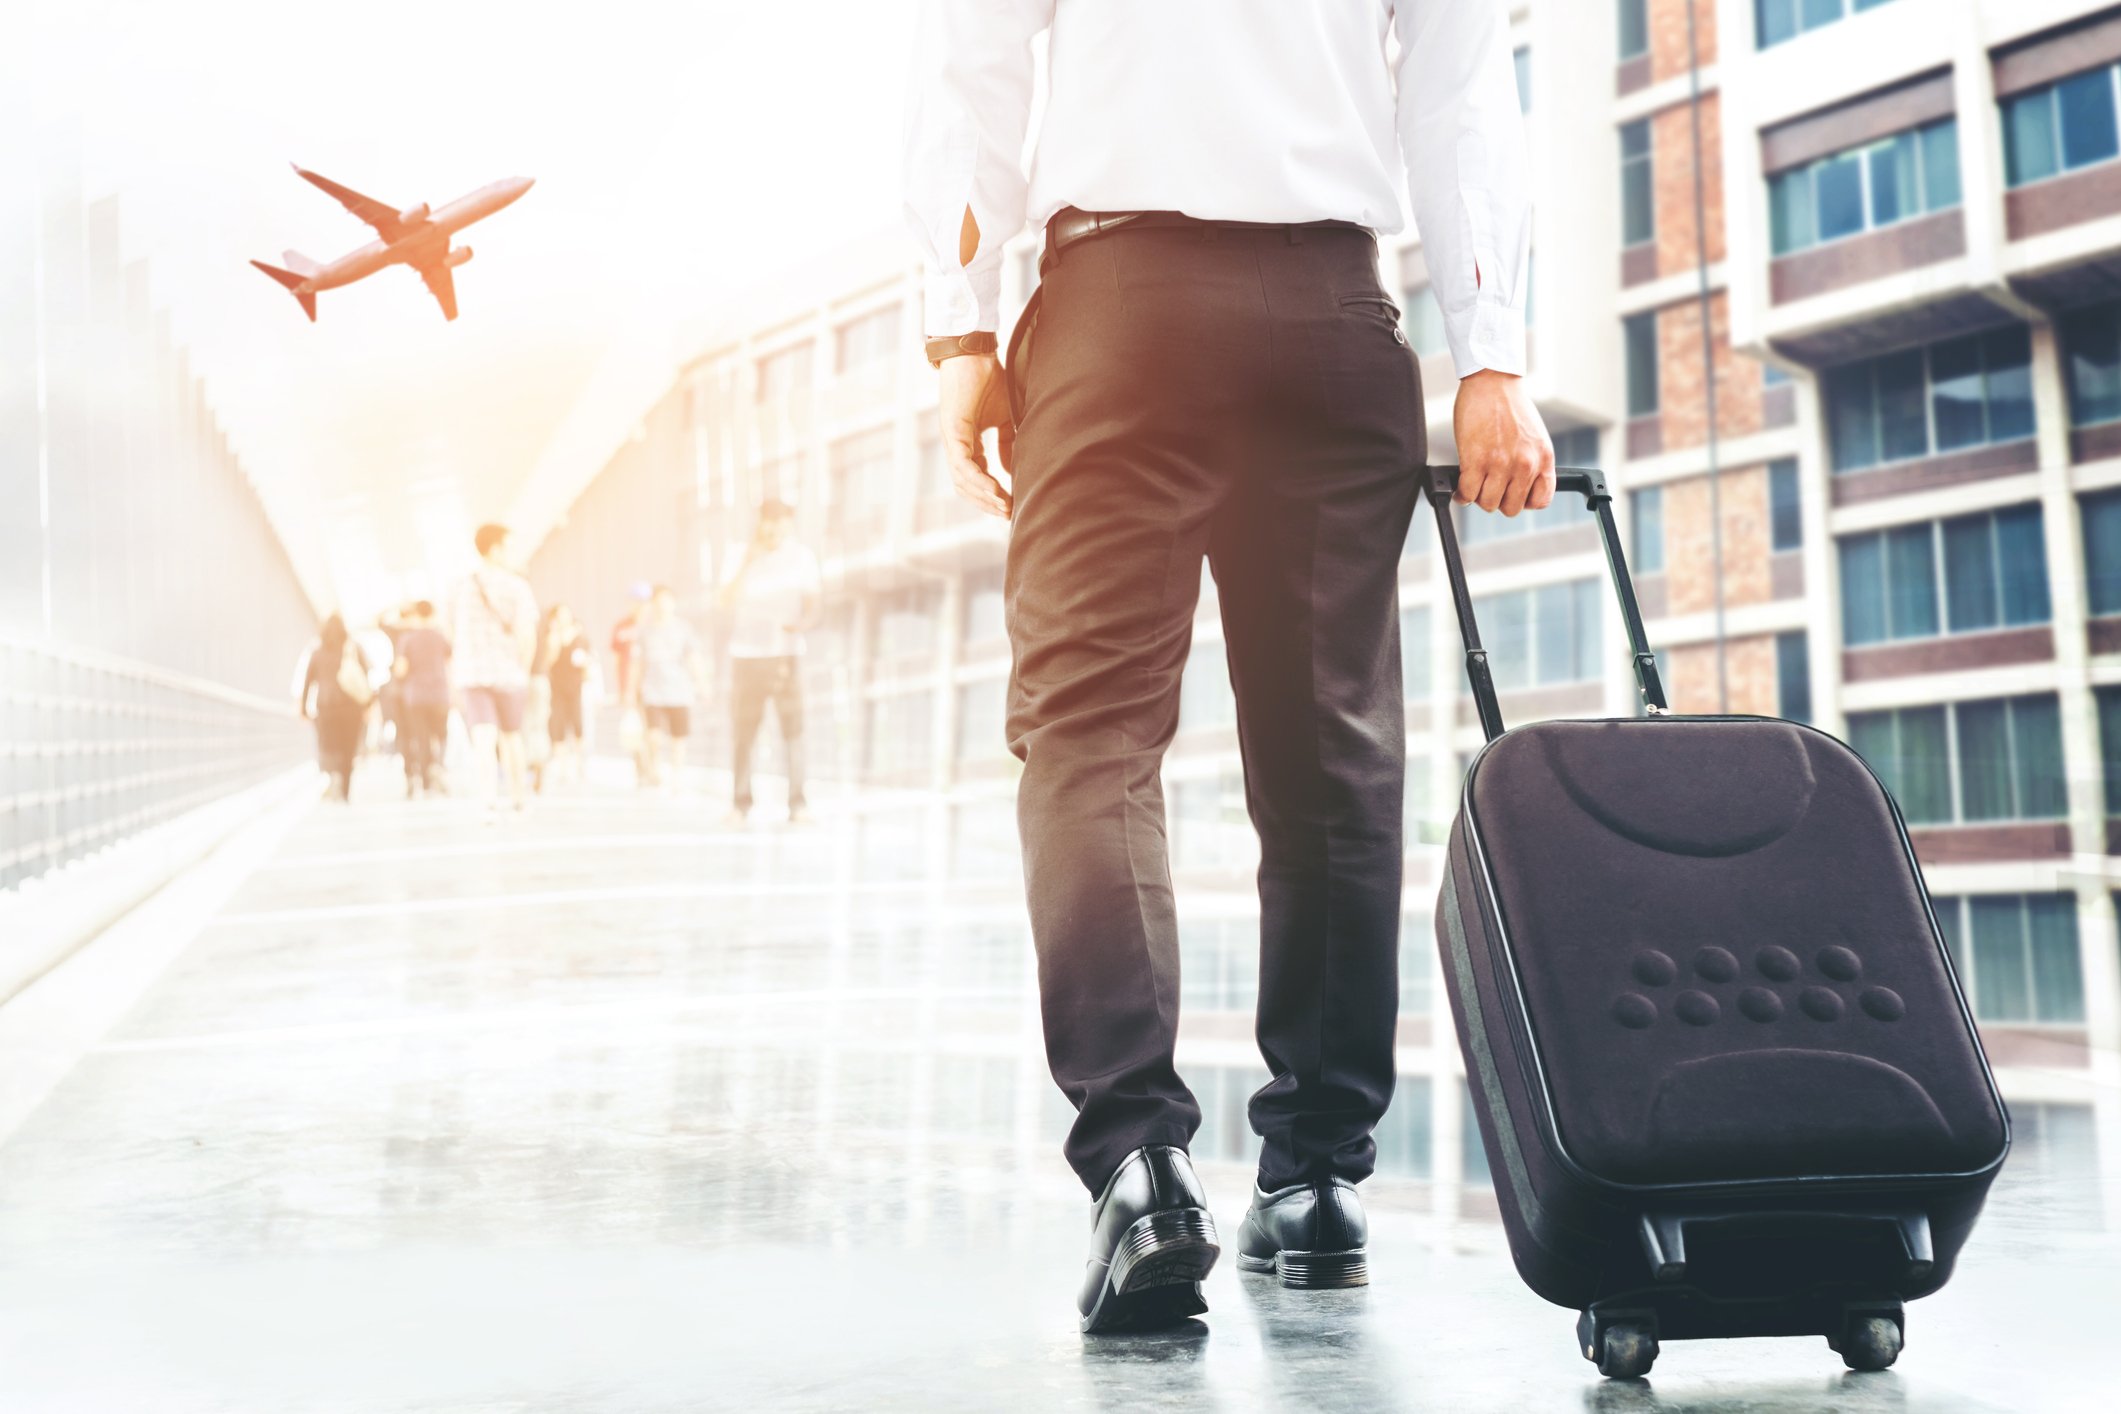 Preparing Hotels for the Return of Business Travel